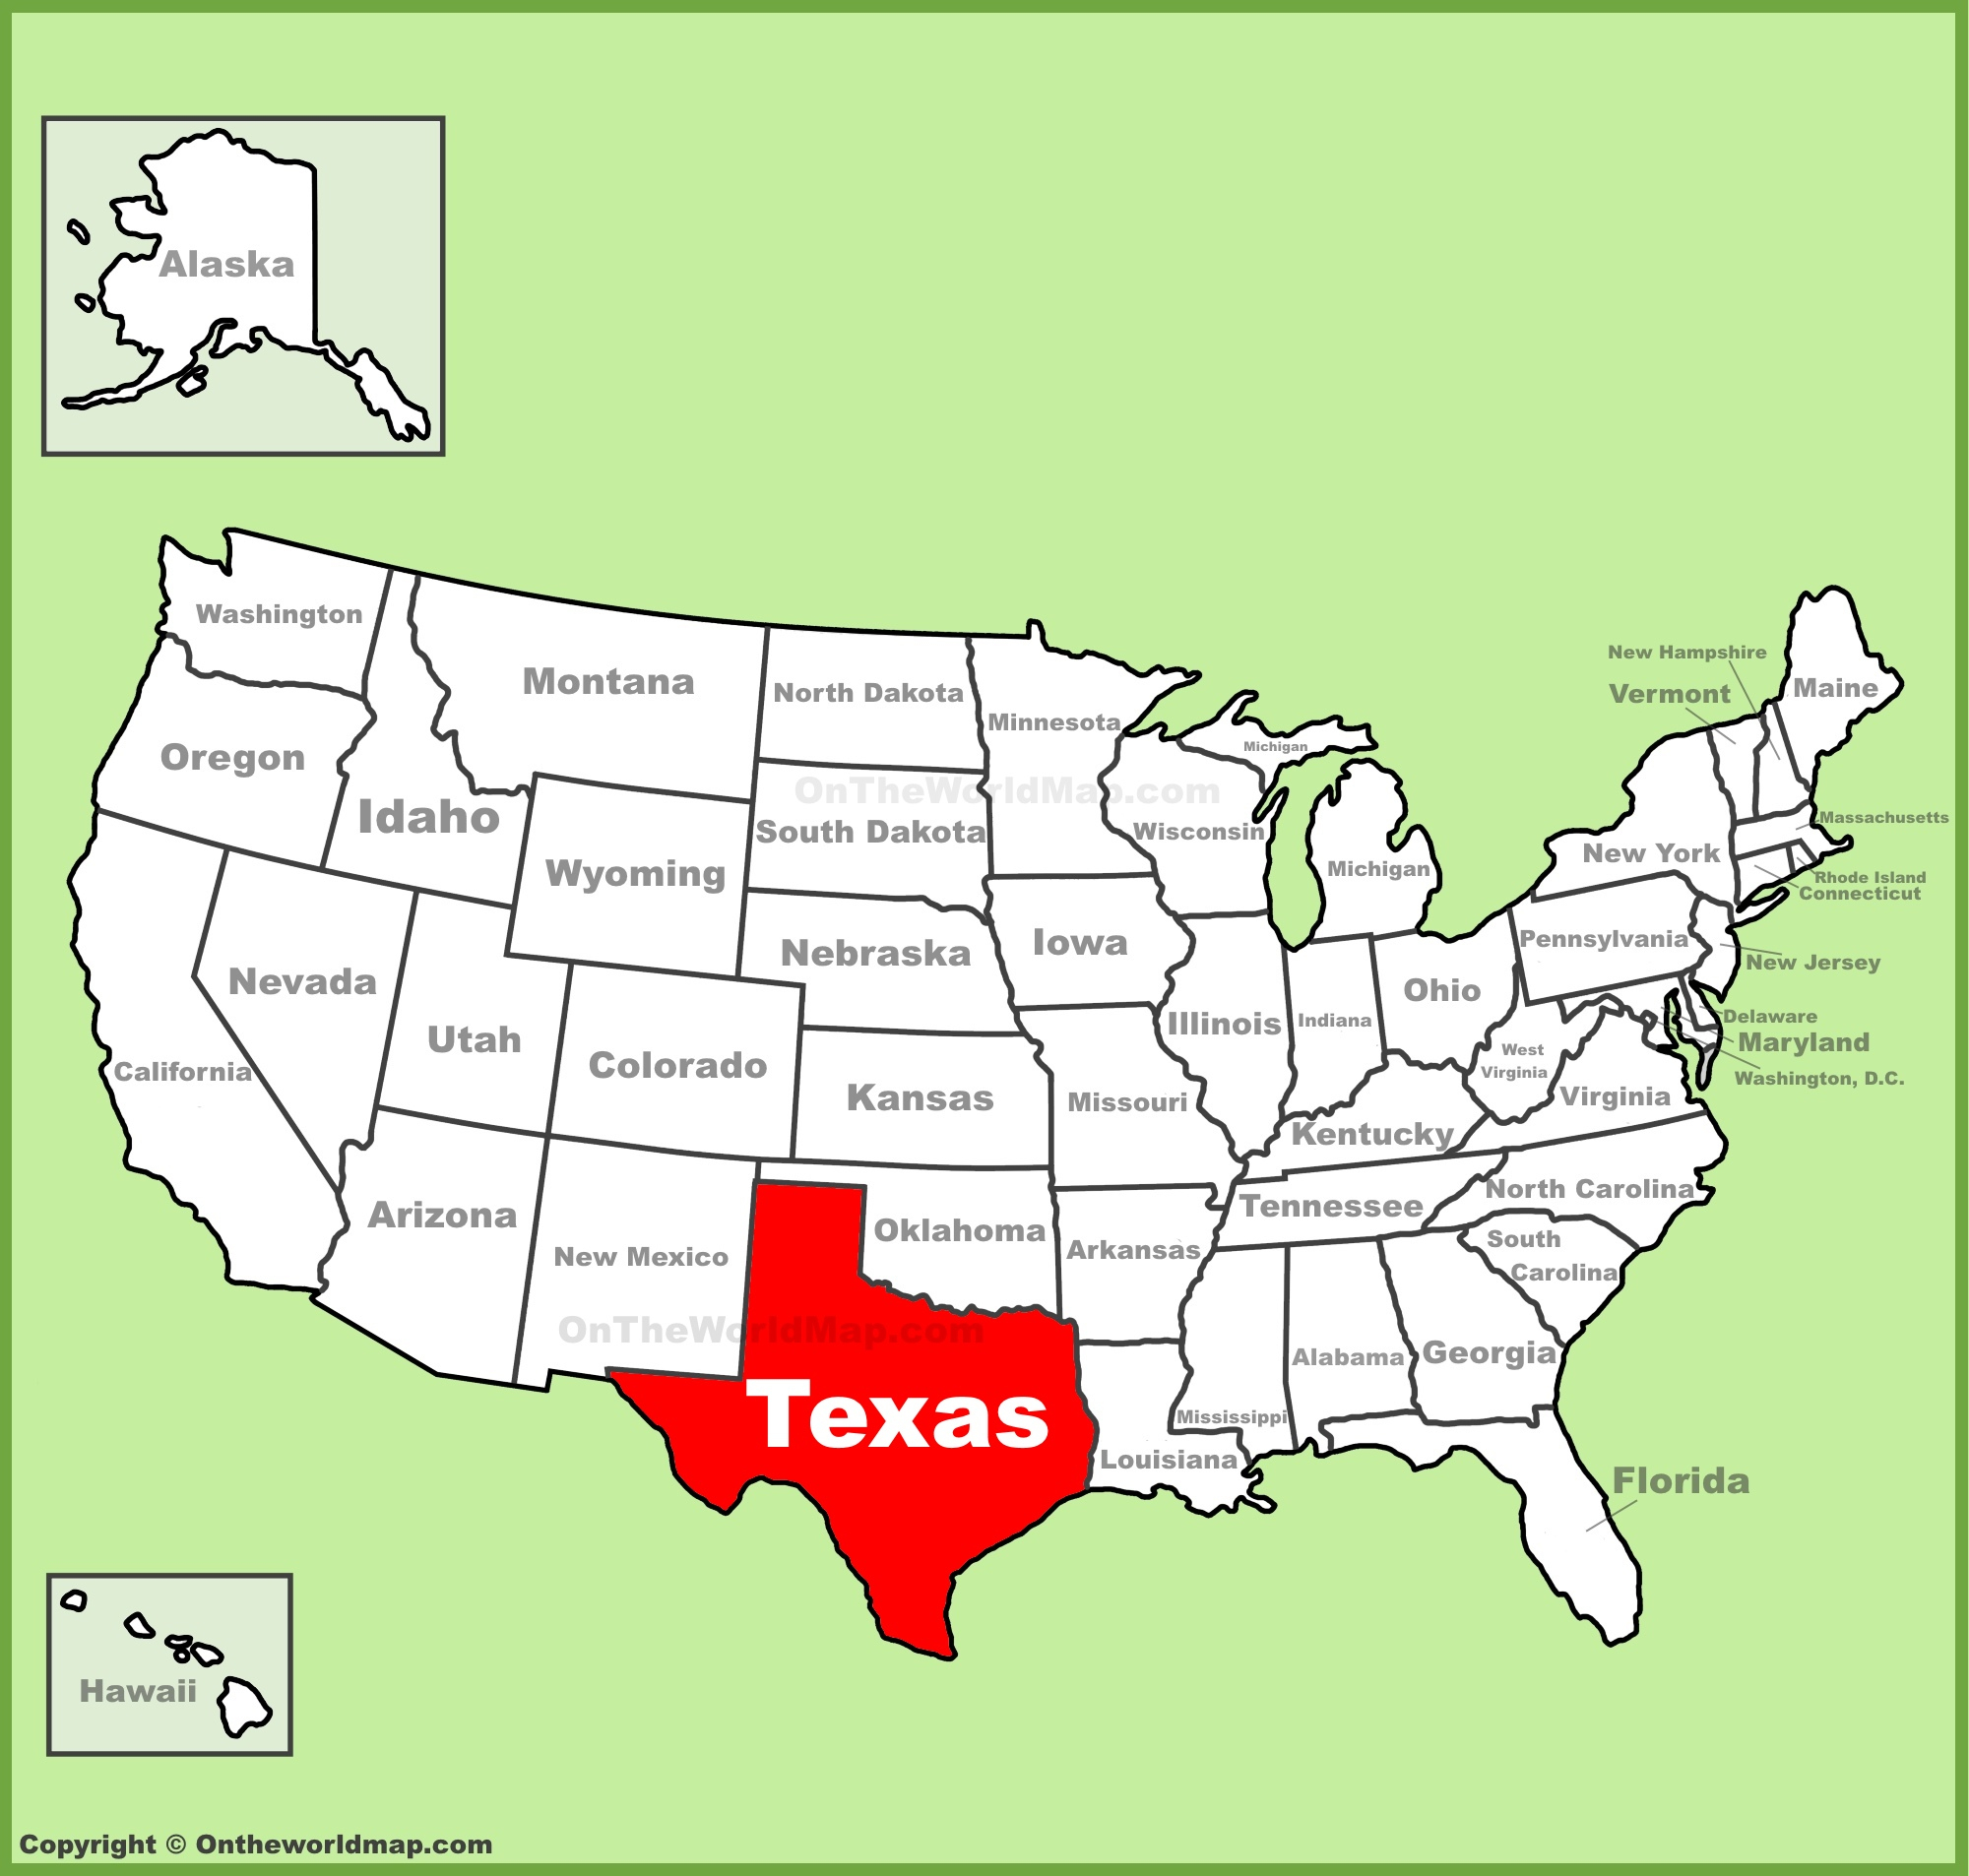 Texas Location On The U.s. Map - Full Map Of Texas